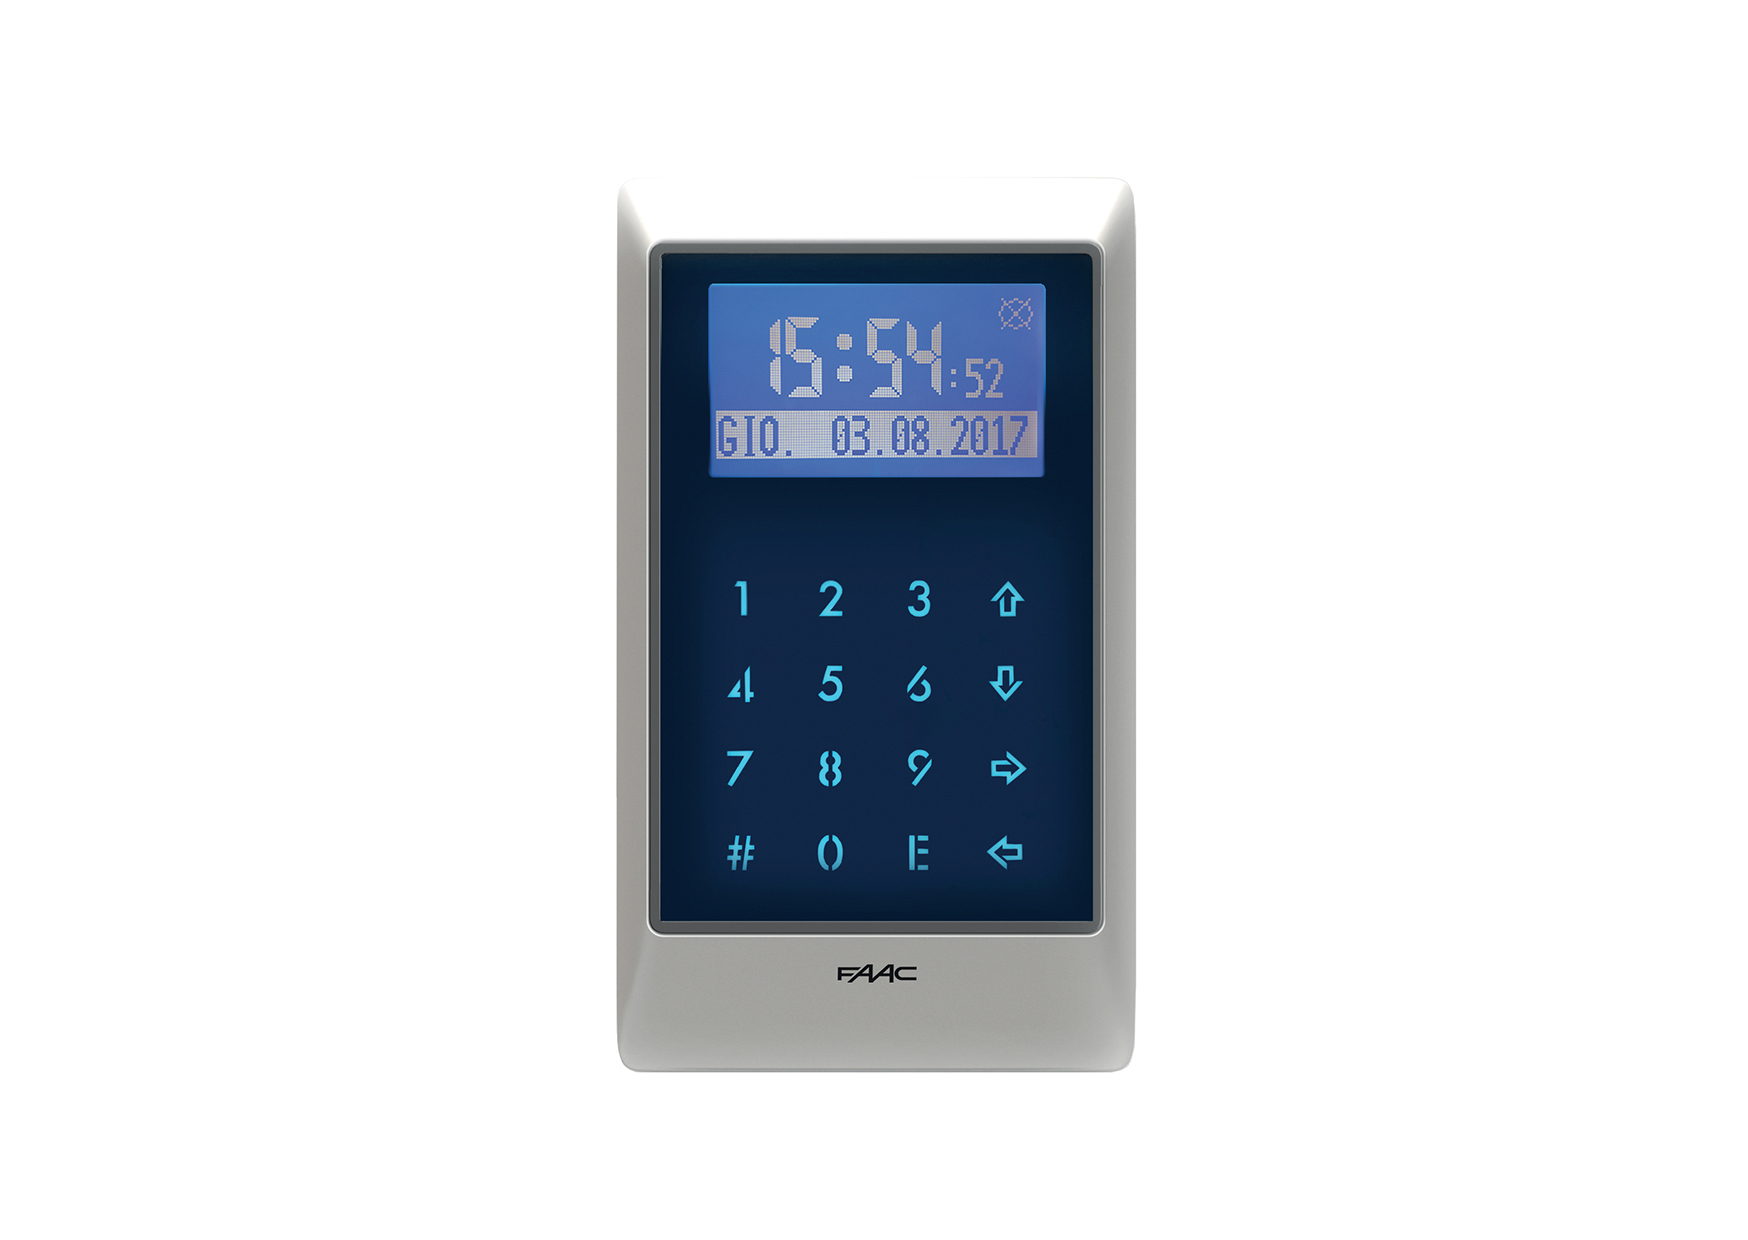 XKPRD Proximity reader with integrated keypad and display